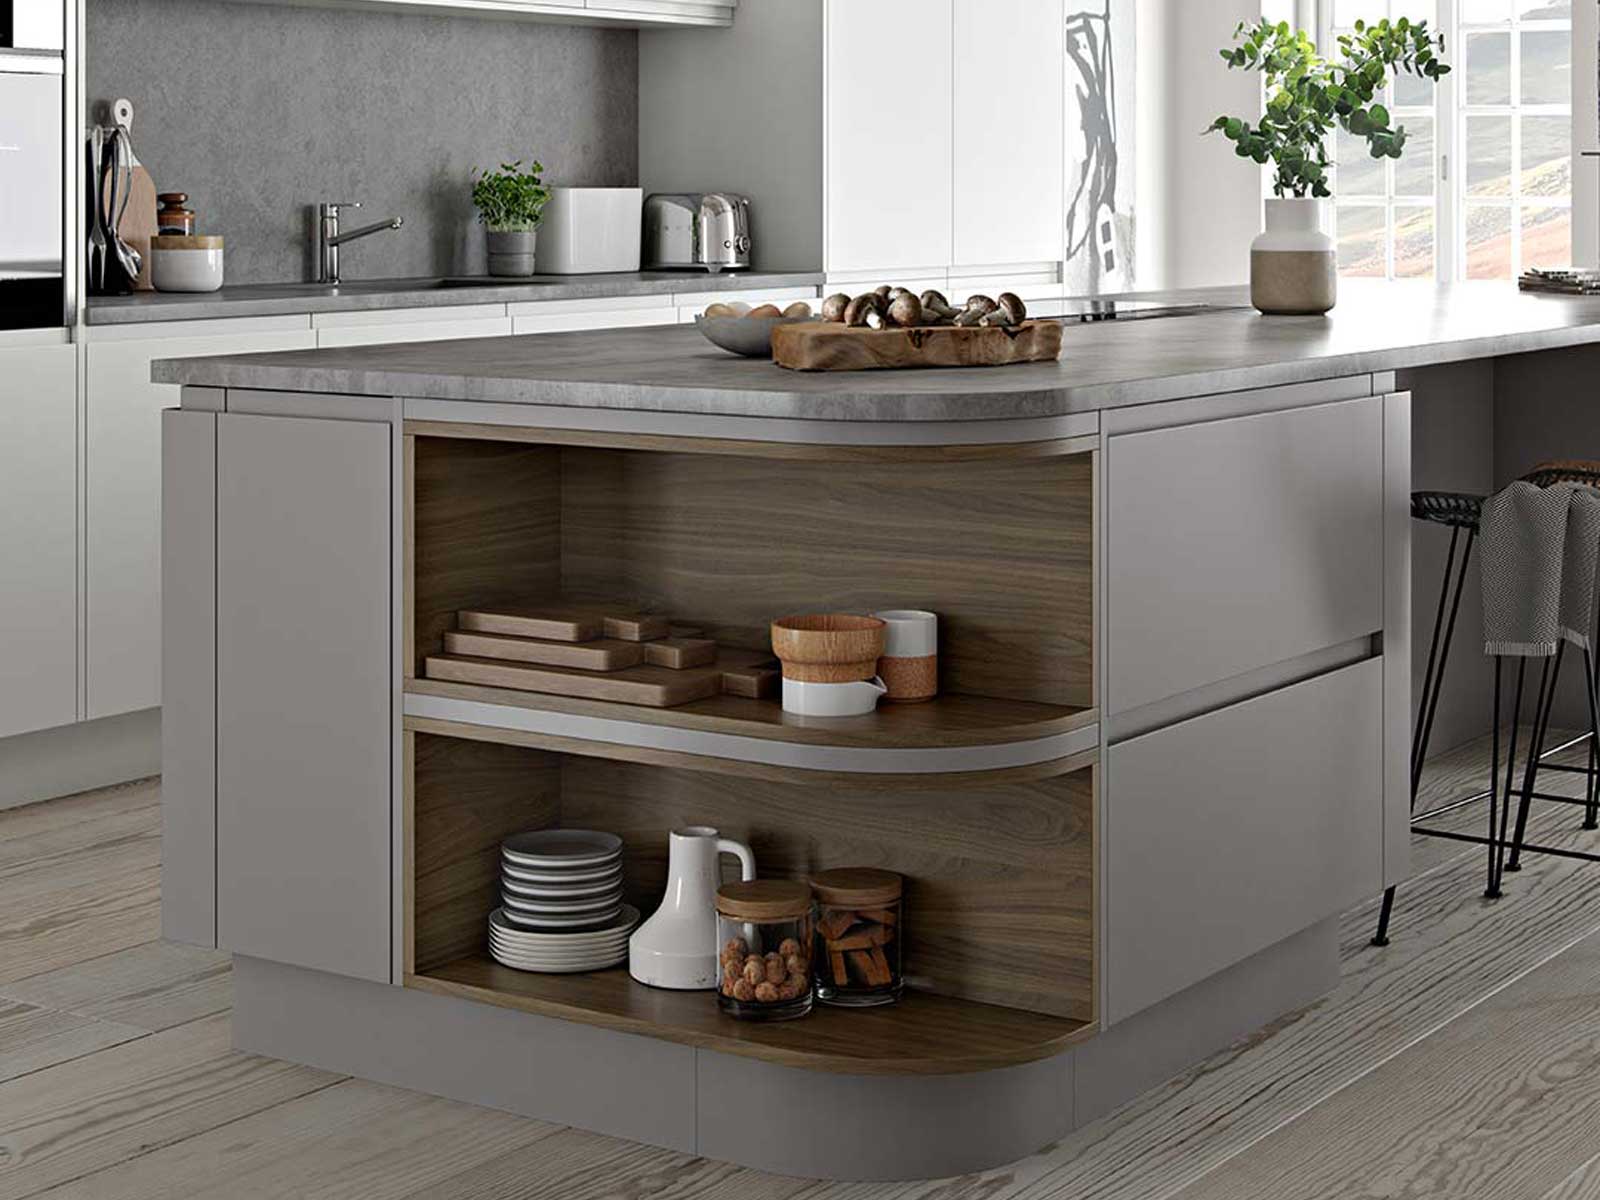 Open shelving used to turn a kitchen island into space-saving furniture